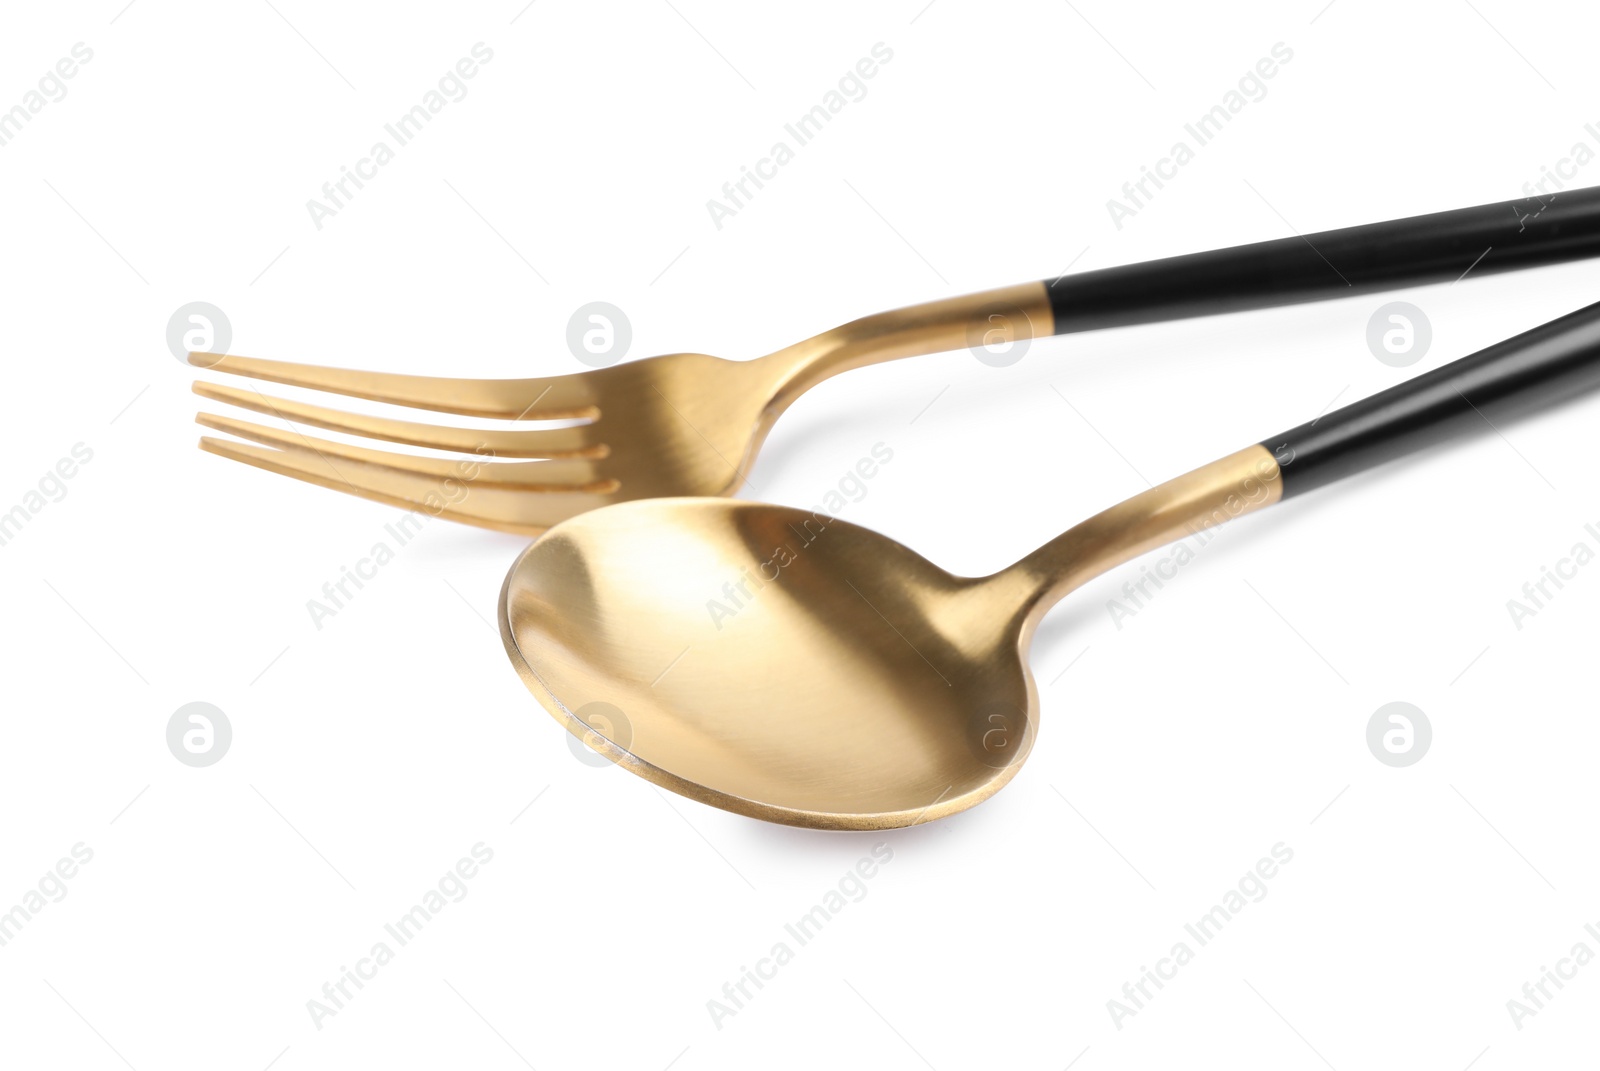 Photo of New golden fork and spoon with black handles on white background, closeup